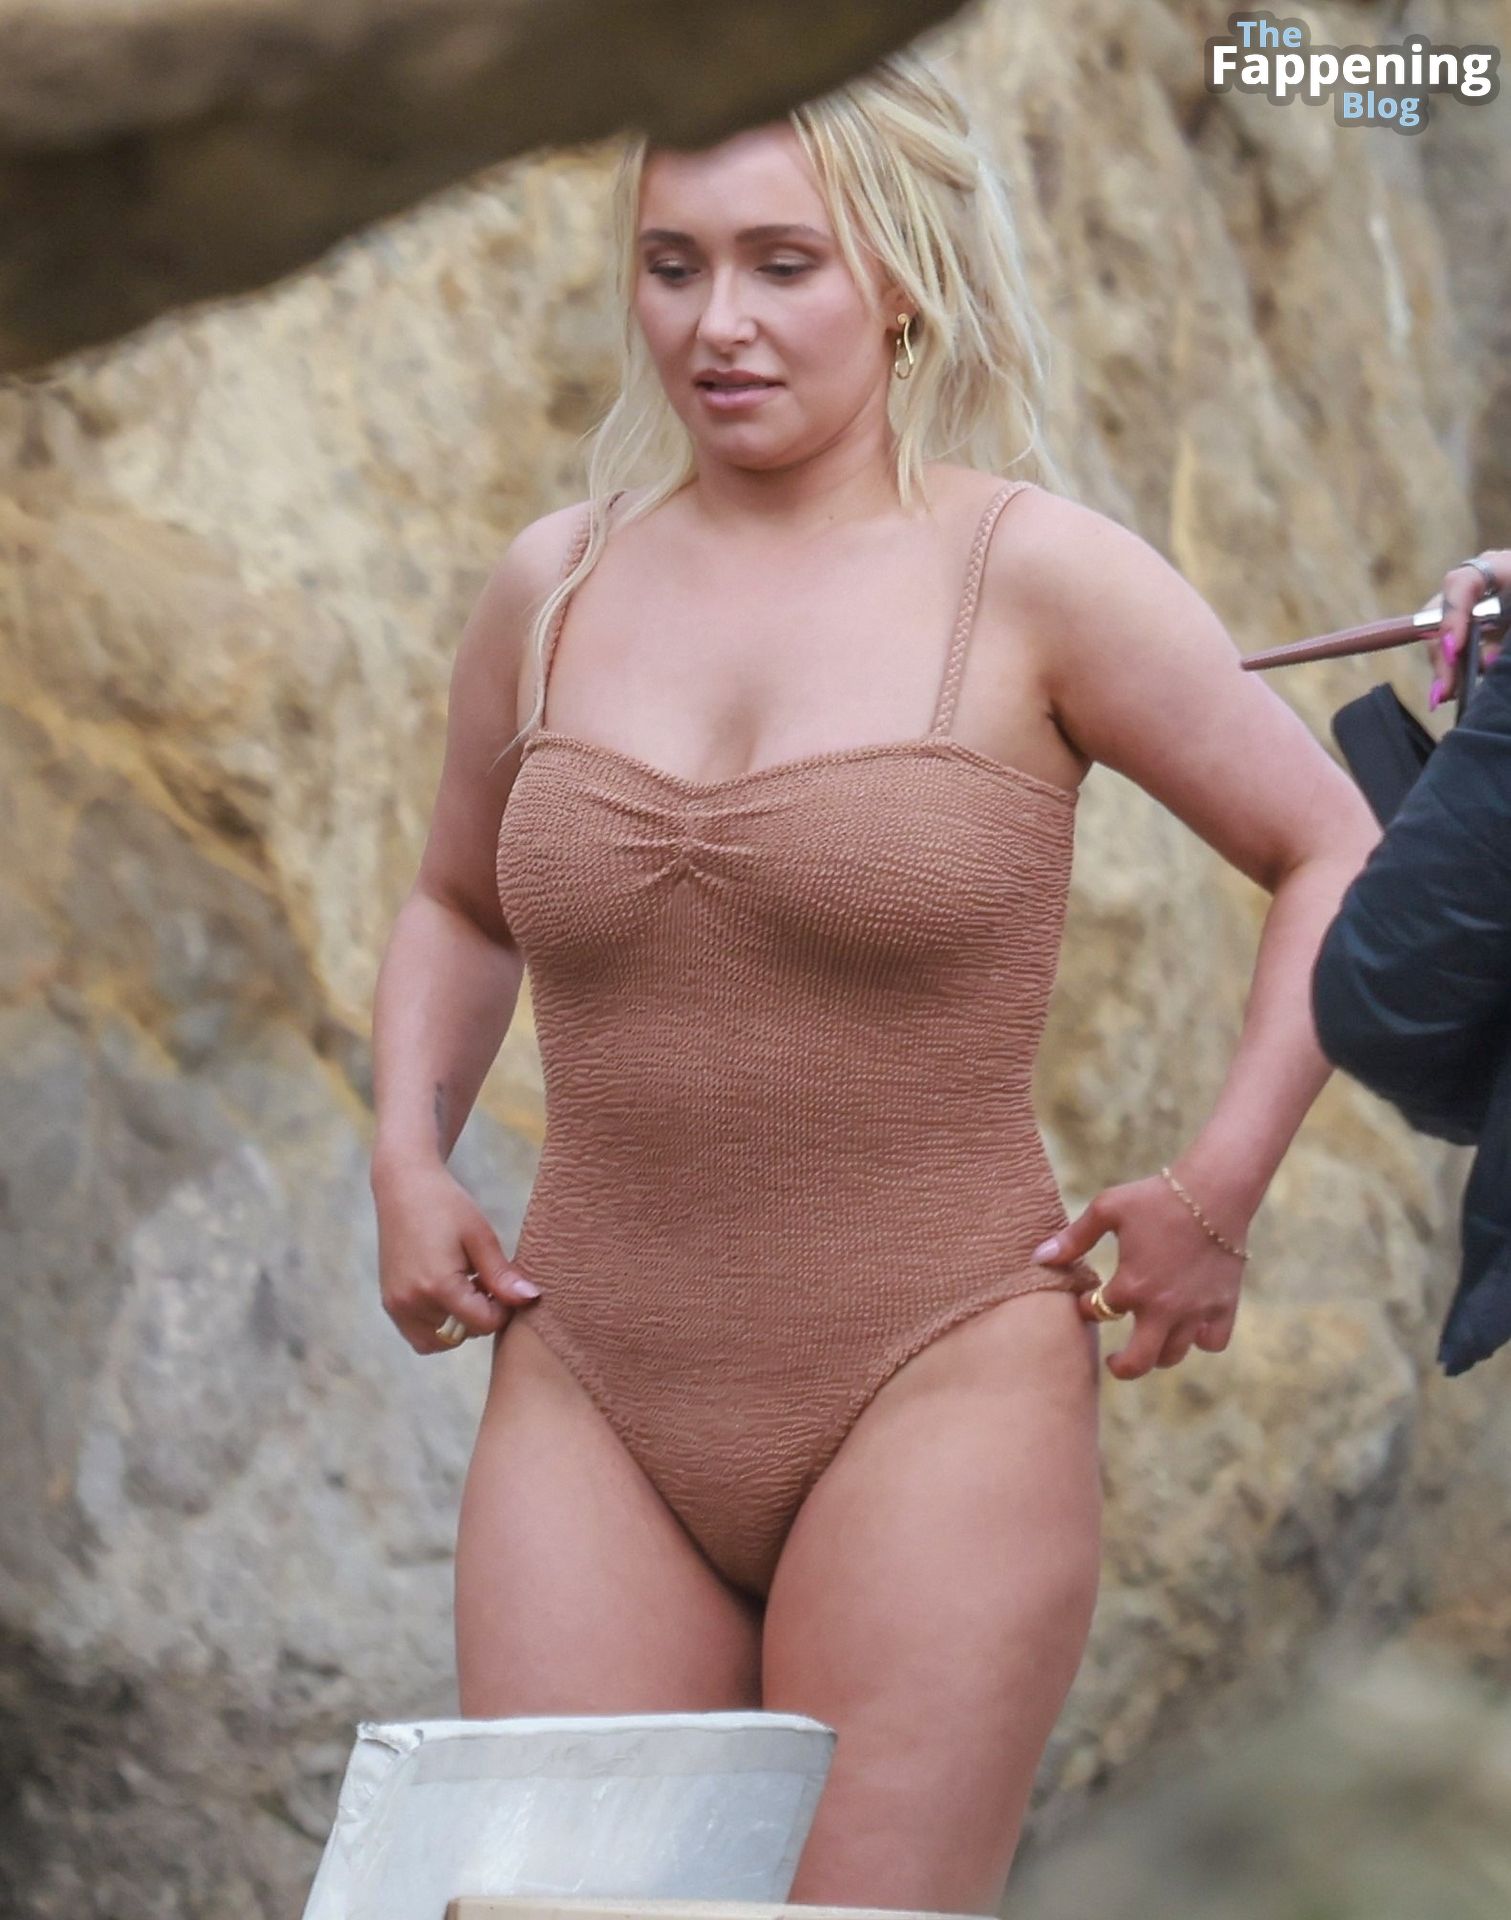 Hayden-Panettiere-Sexy-The-Fappening-Blog-75.jpg